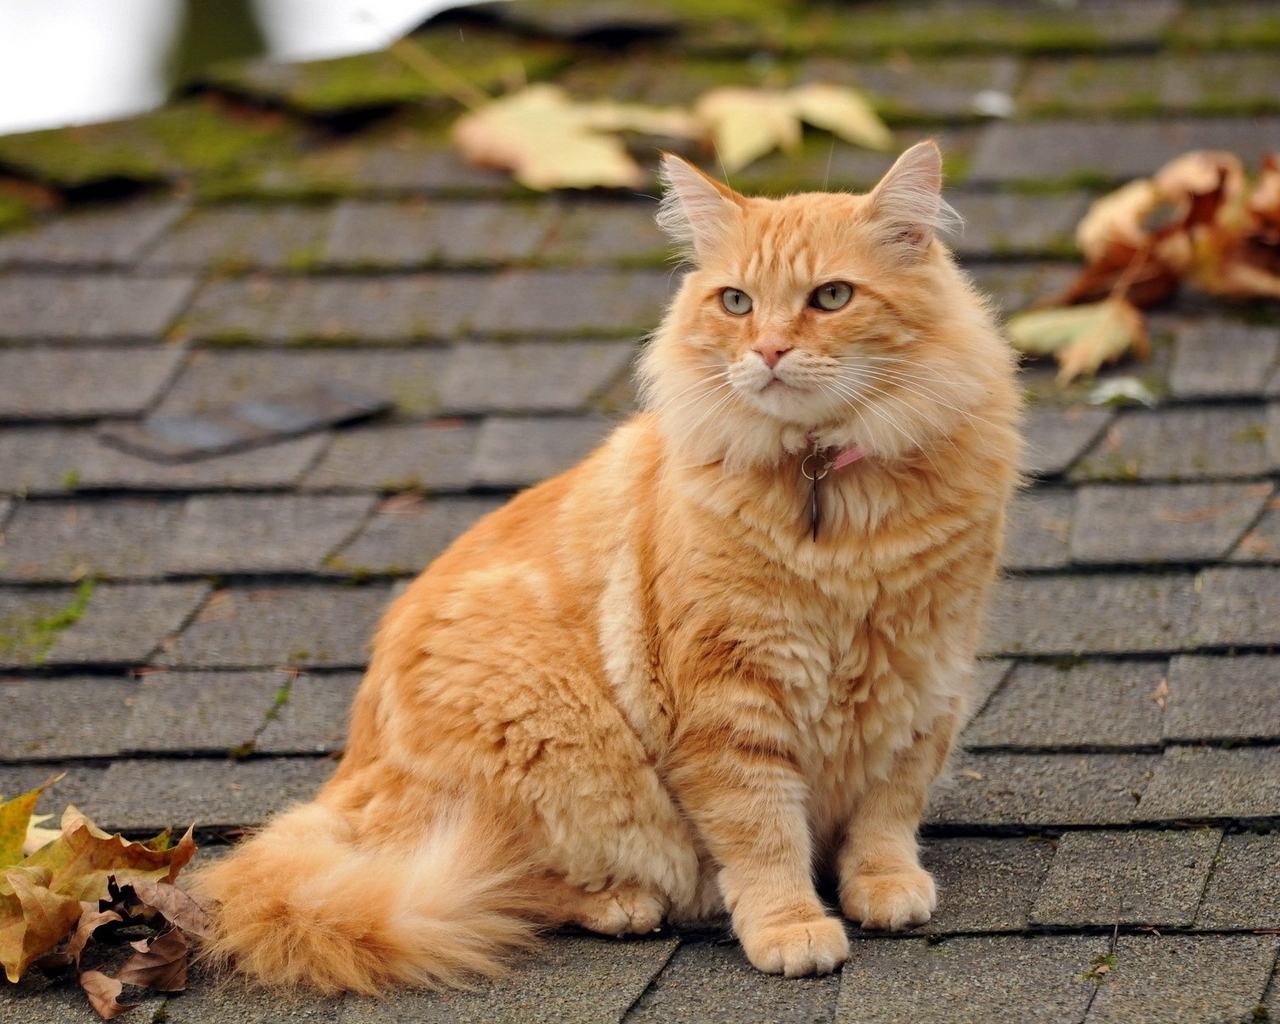 Image: Cat, red, sitting, collar, look, roof, leaves